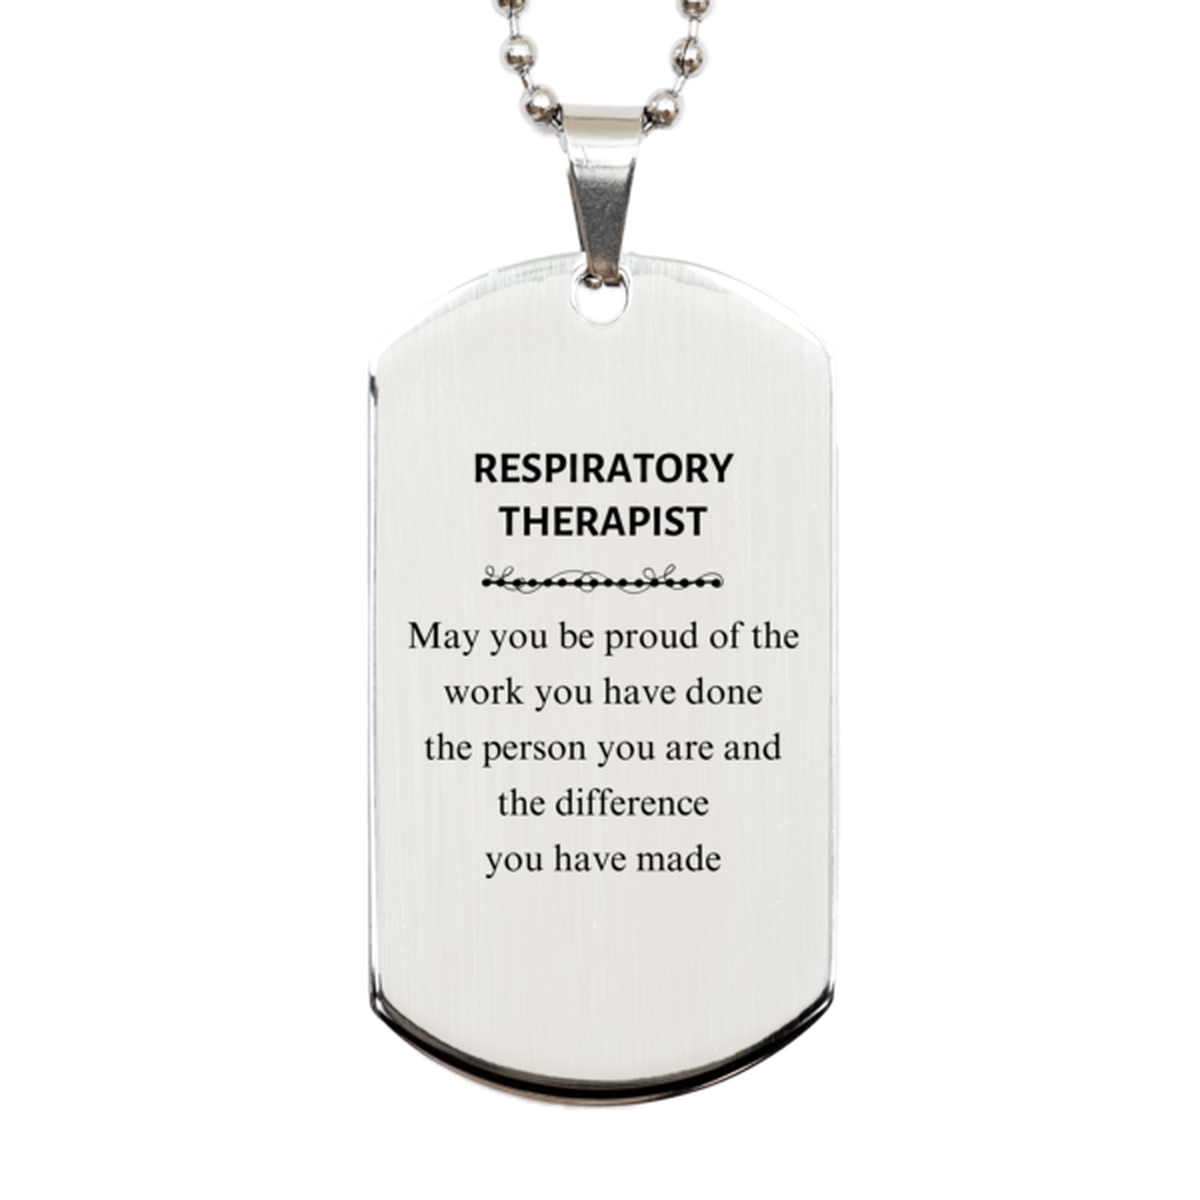 Respiratory Therapist May you be proud of the work you have done, Retirement Respiratory Therapist Silver Dog Tag for Colleague Appreciation Gifts Amazing for Respiratory Therapist